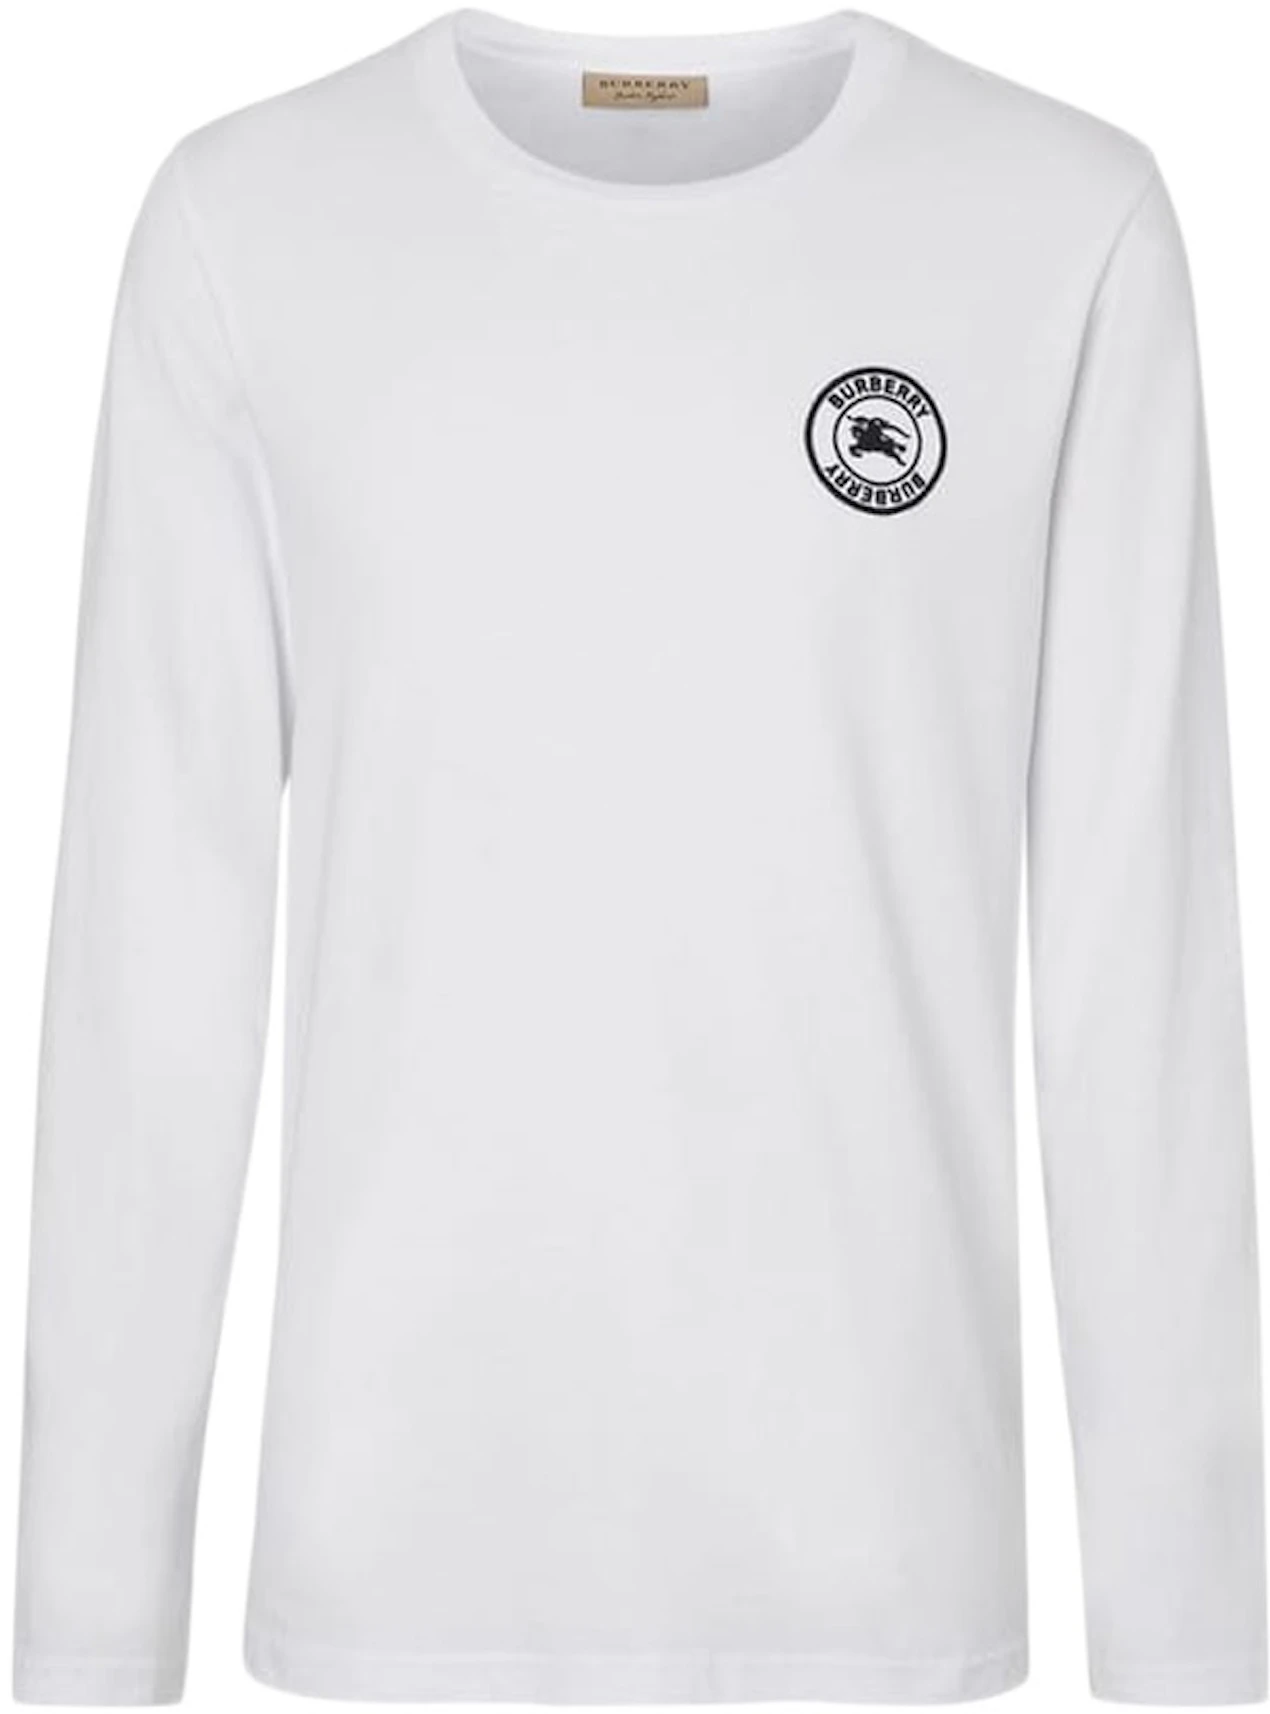 Burberry Embroidered Logo Cotton Long Sleeve T-shirt White - US